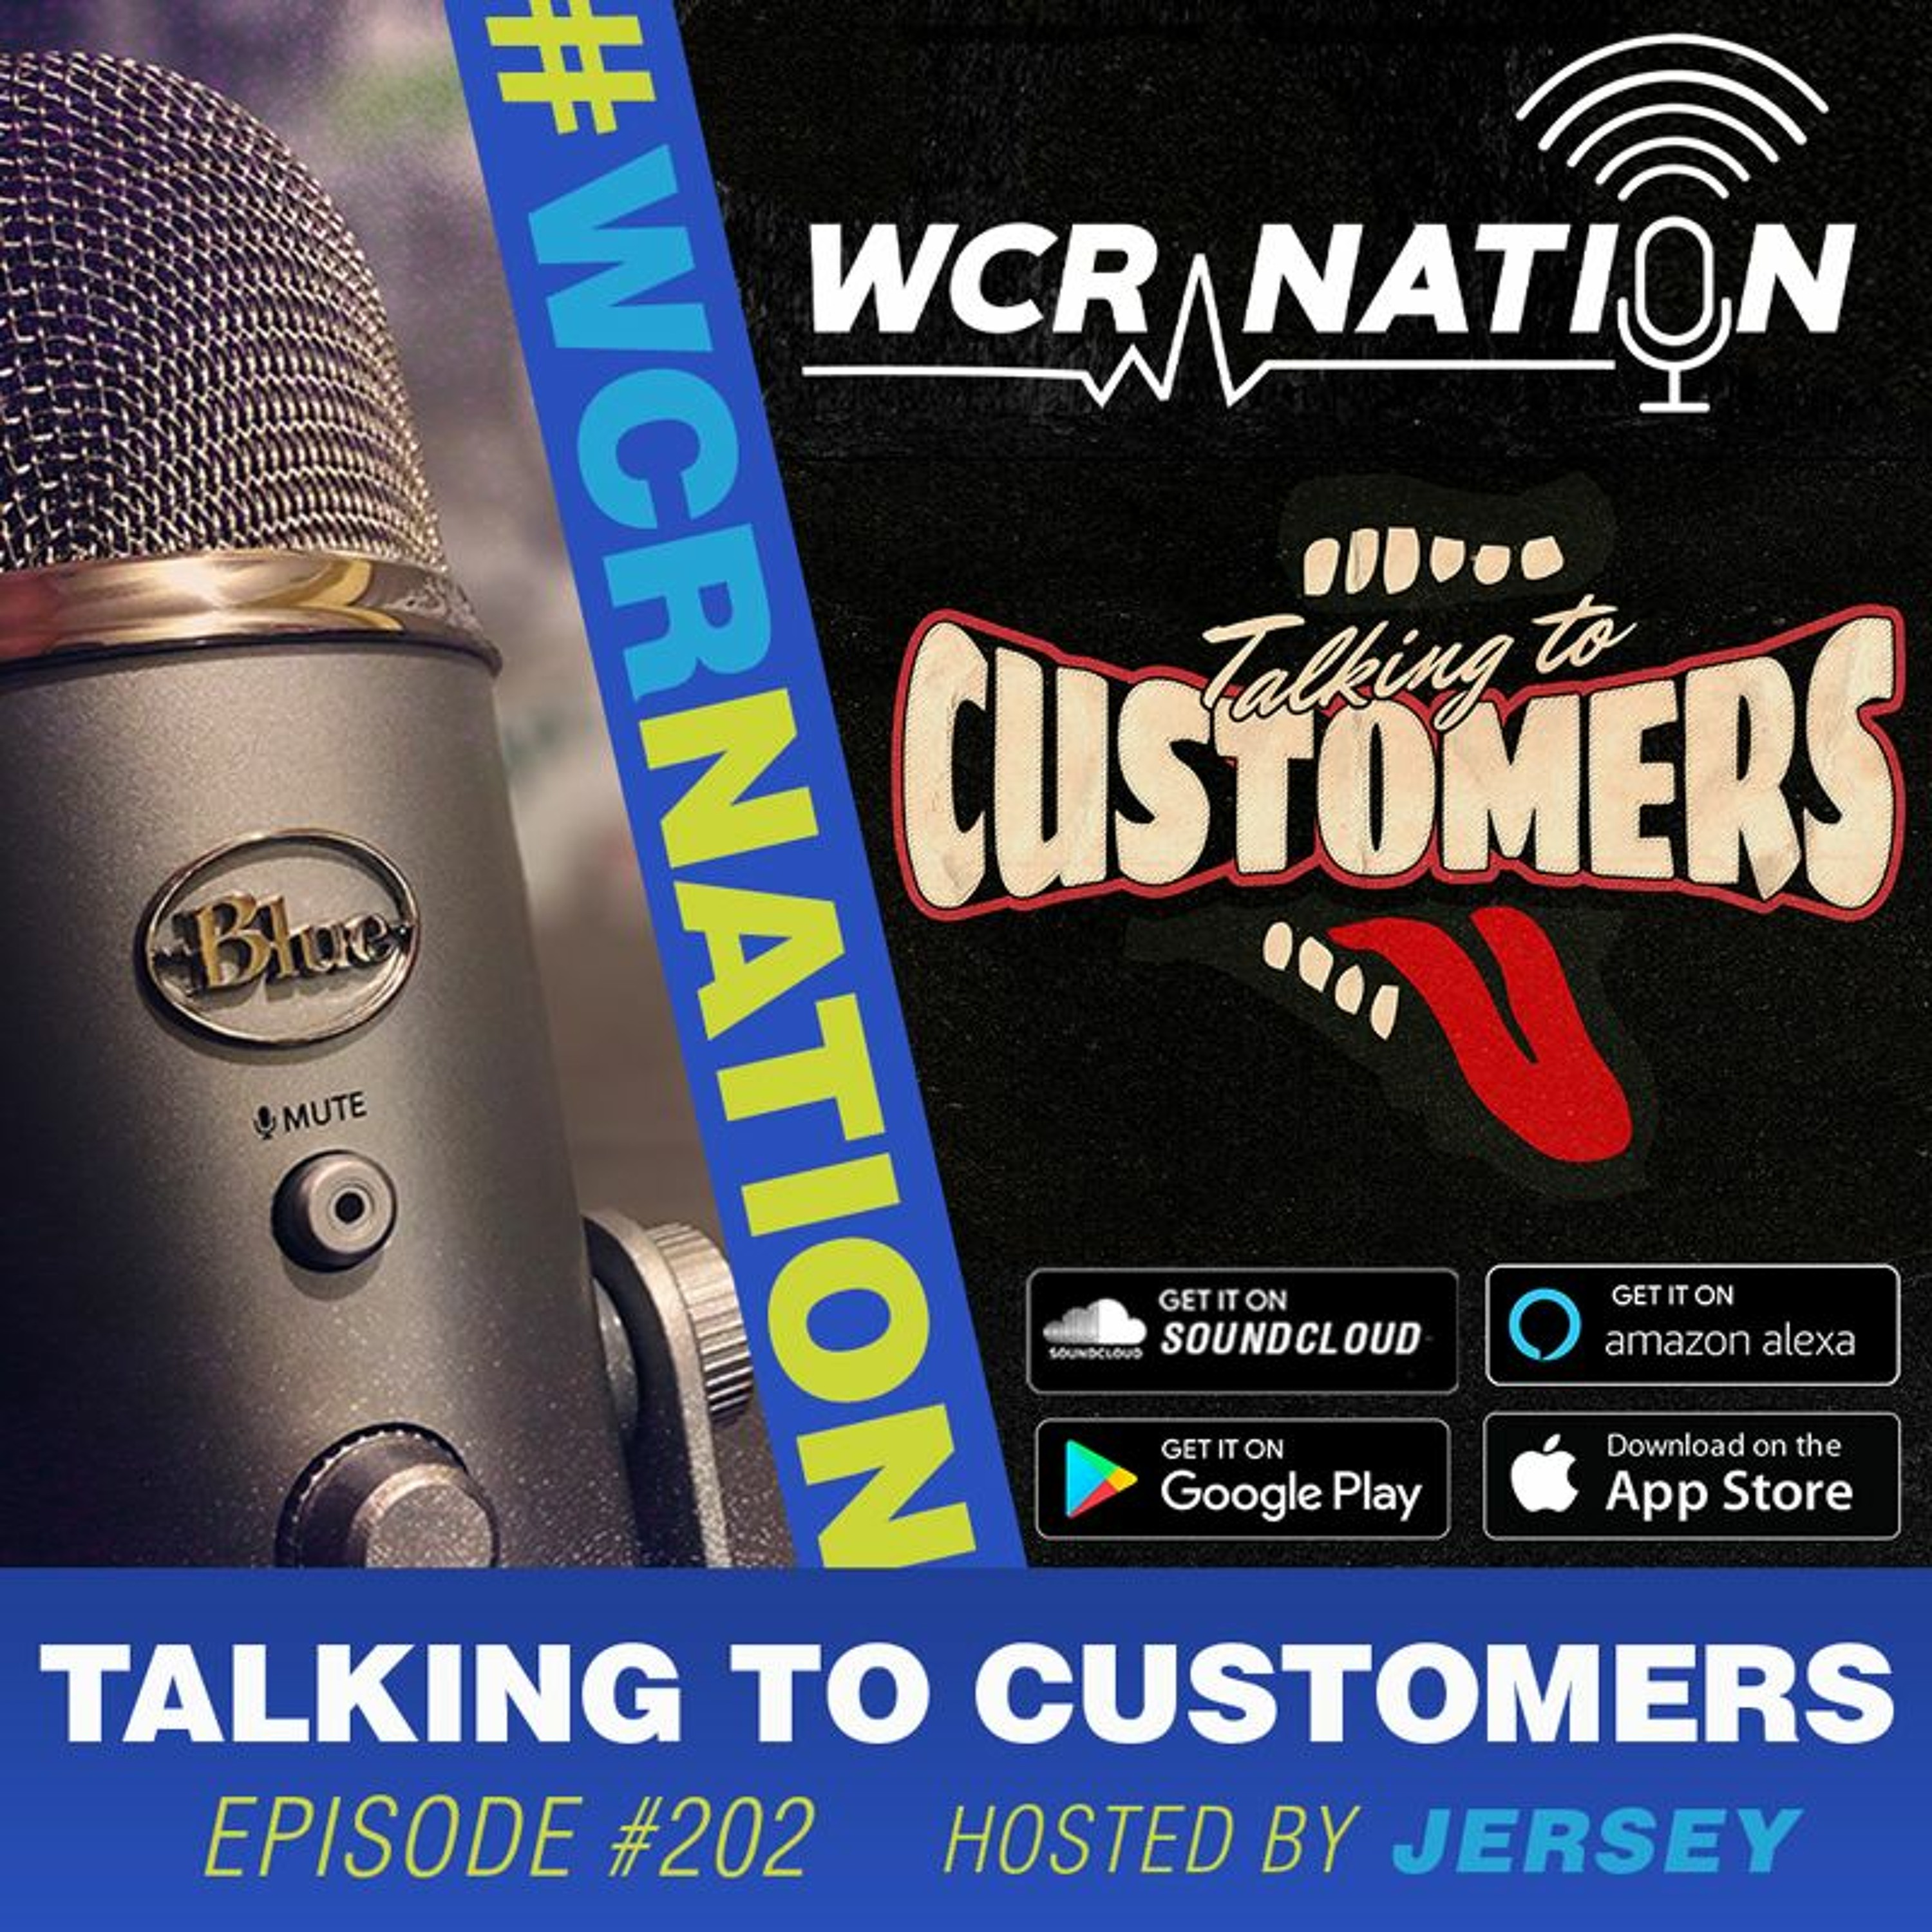 How to talk to customers | WCR Nation Ep 202 | A small business podcast